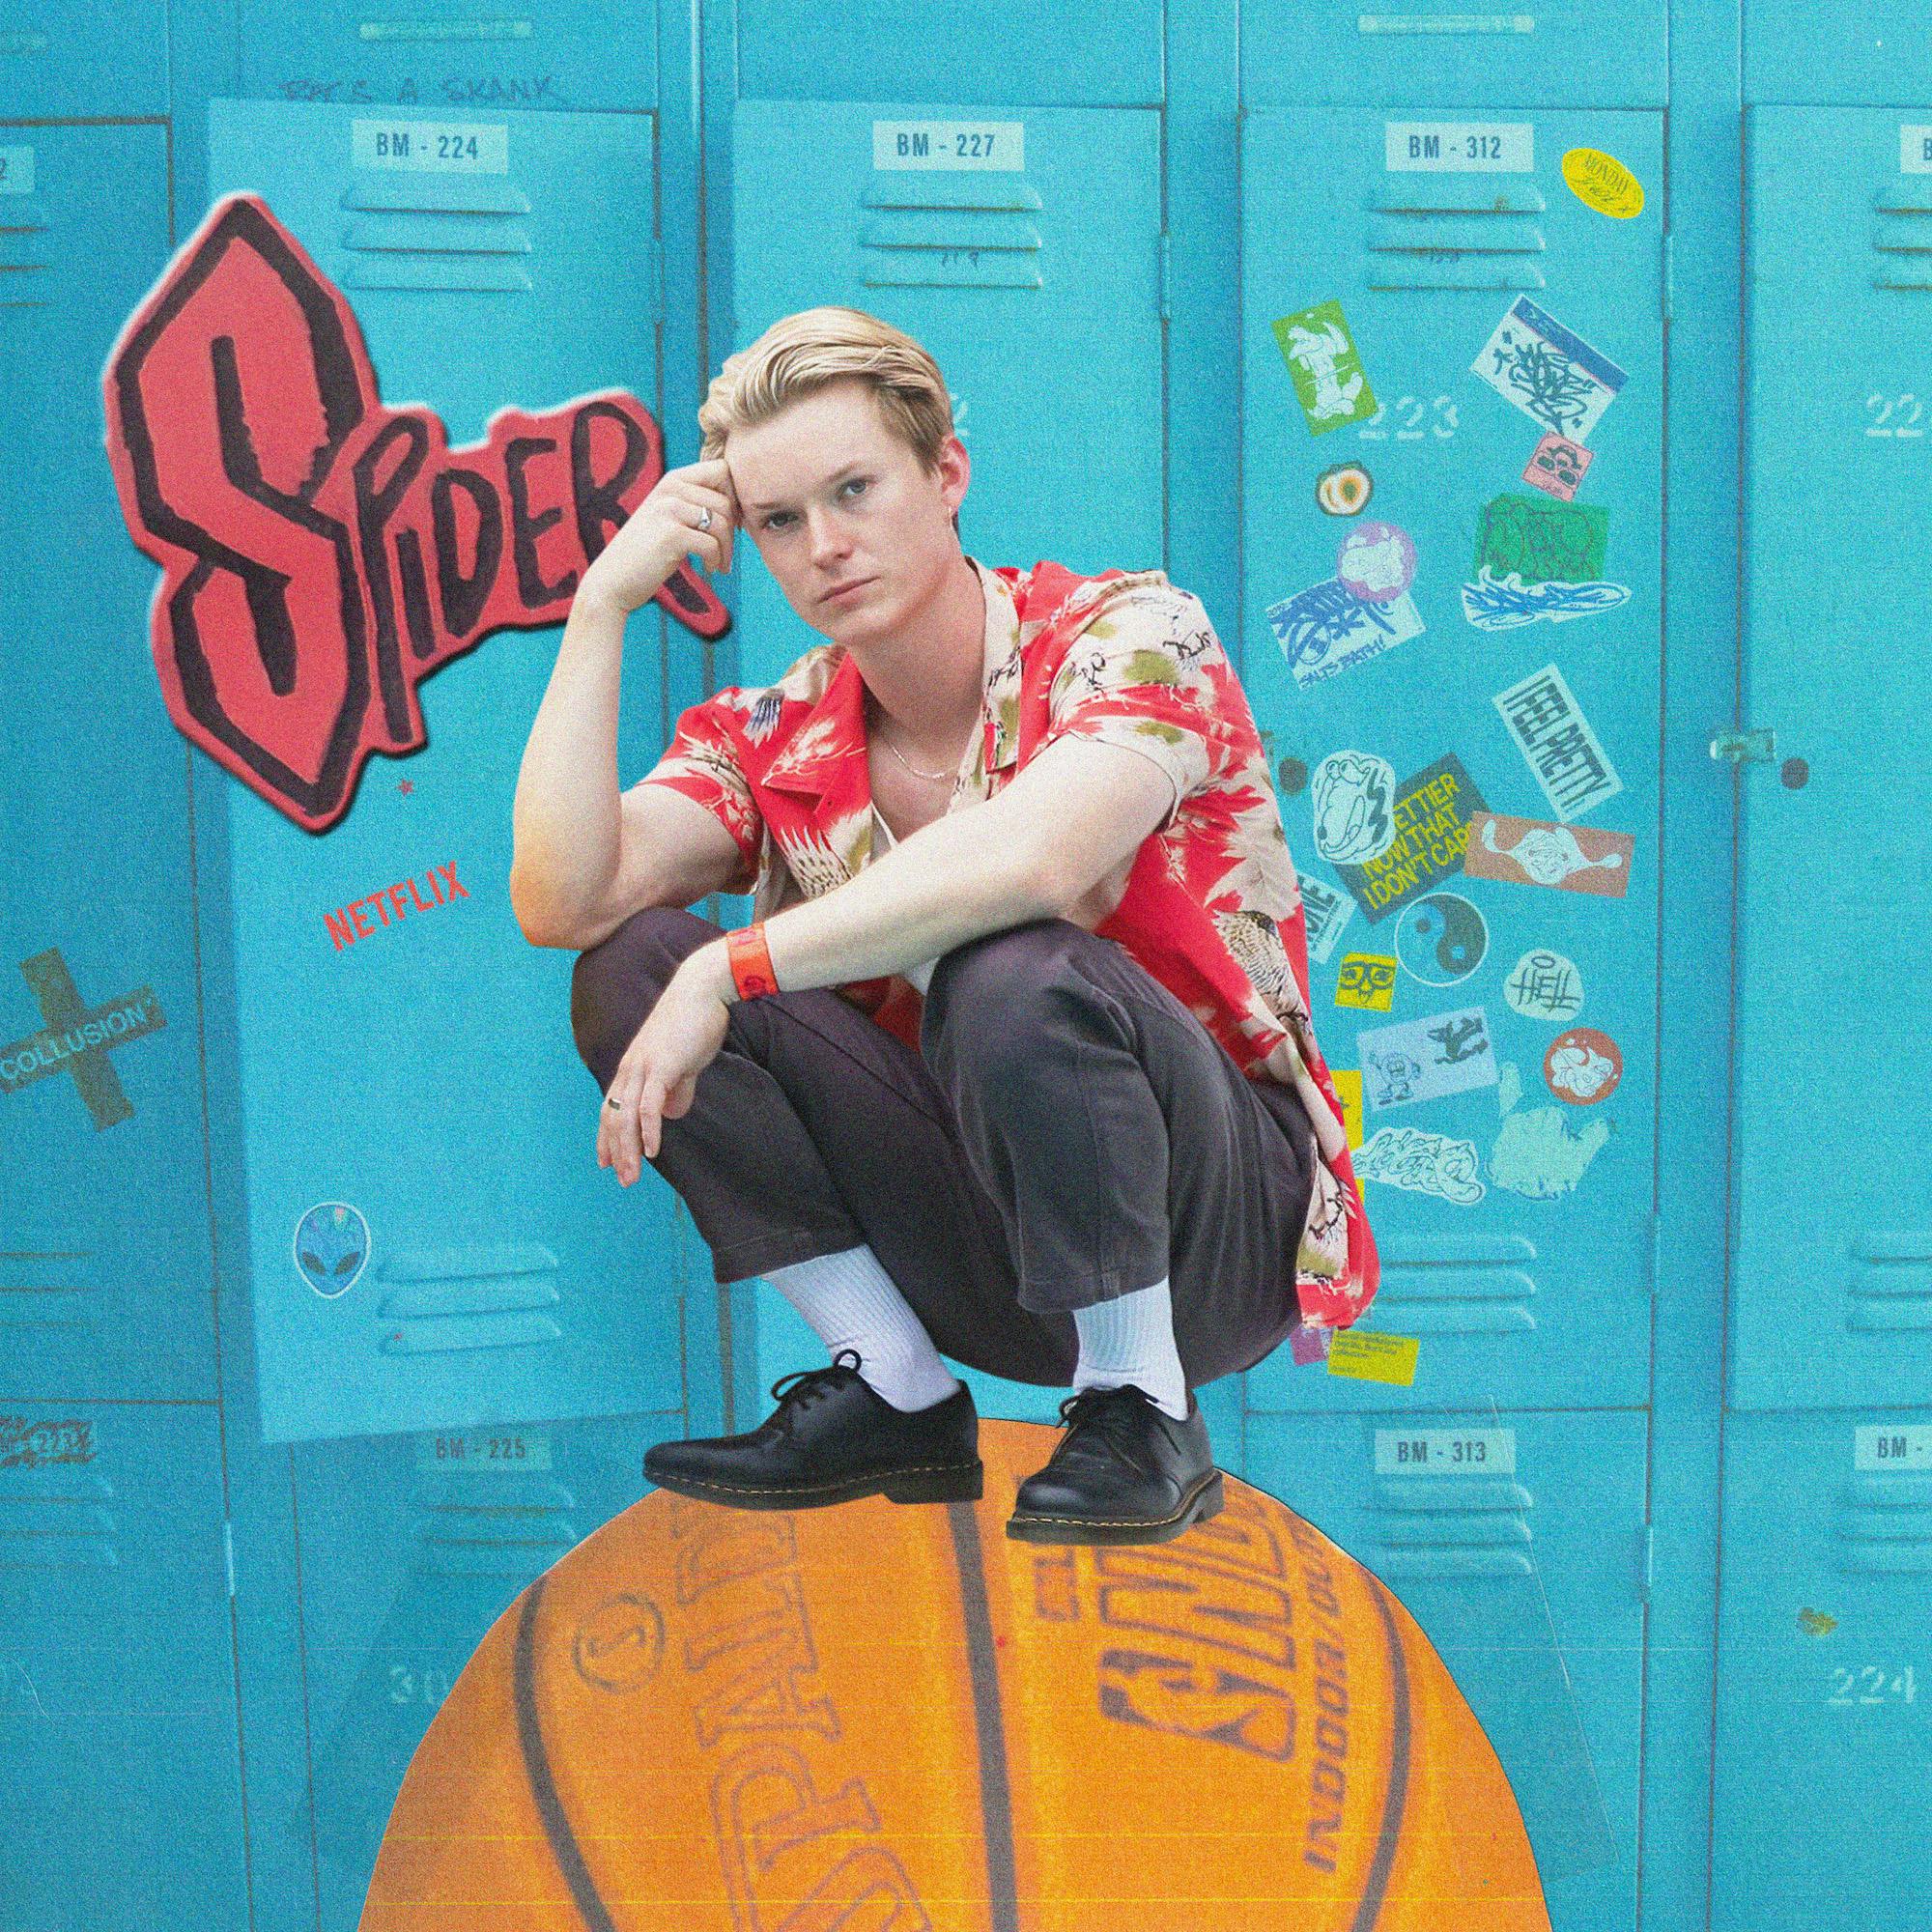 Bryn Chapman Parish plays Spider. He stands on a basketball in front of some blue lockers.